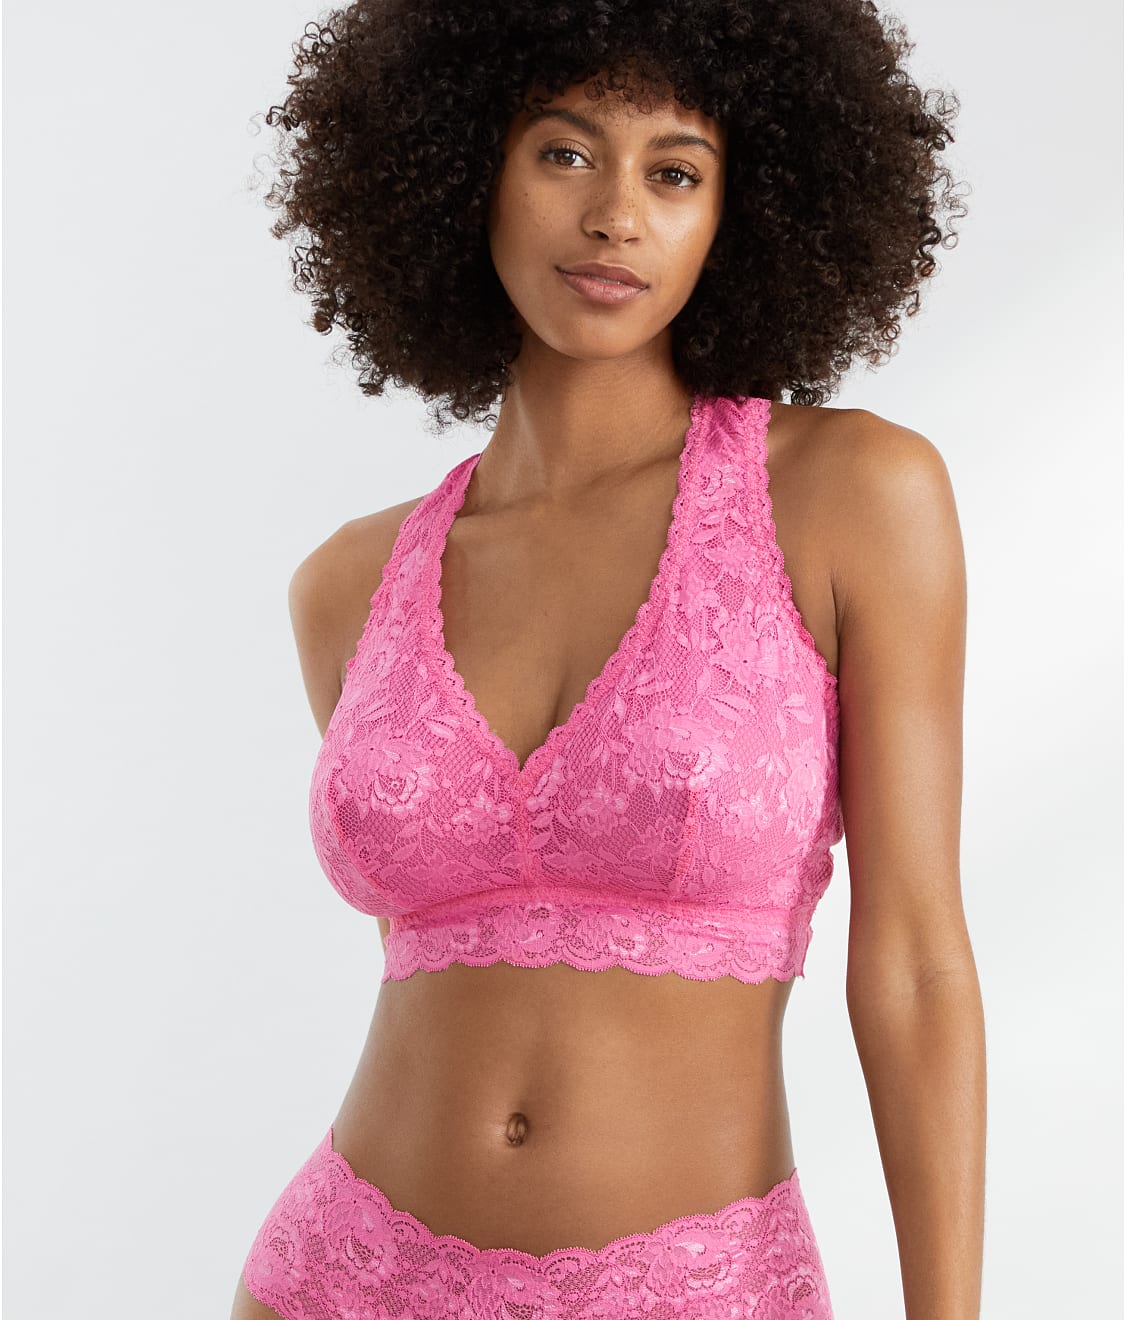 Bralette vs. Bra: Decoding the Differences and Choosing the Right